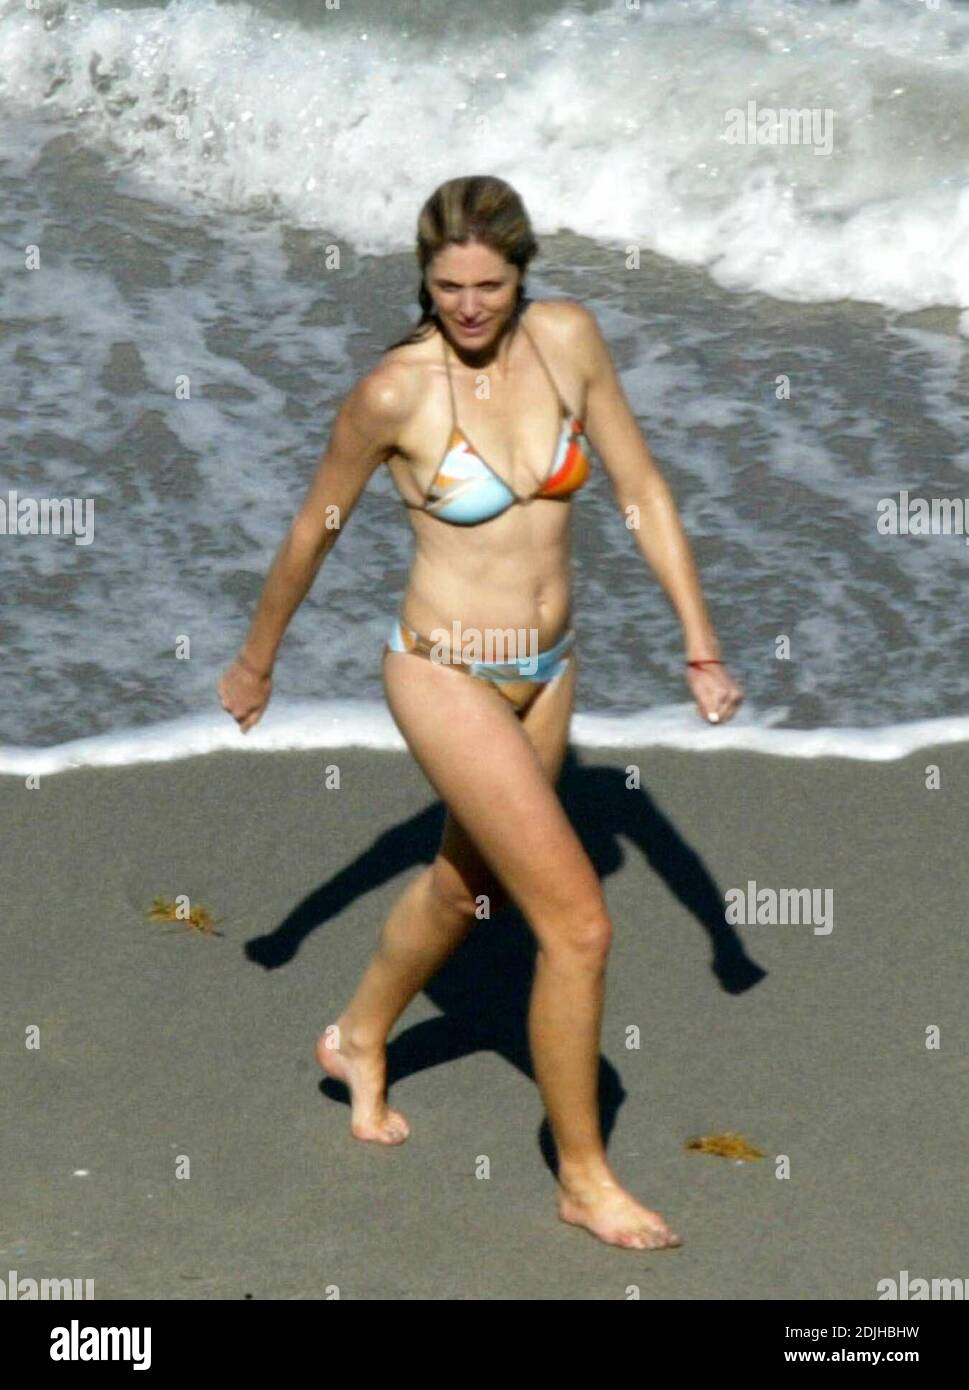 Exclusive!! Marla Maples still looks great at 42. The model/actress and former wife of Donald Trump lunched on Miami Beach while chatting with friends before taking a refreshing dip in the ocean, 4/14/06. Stock Photo